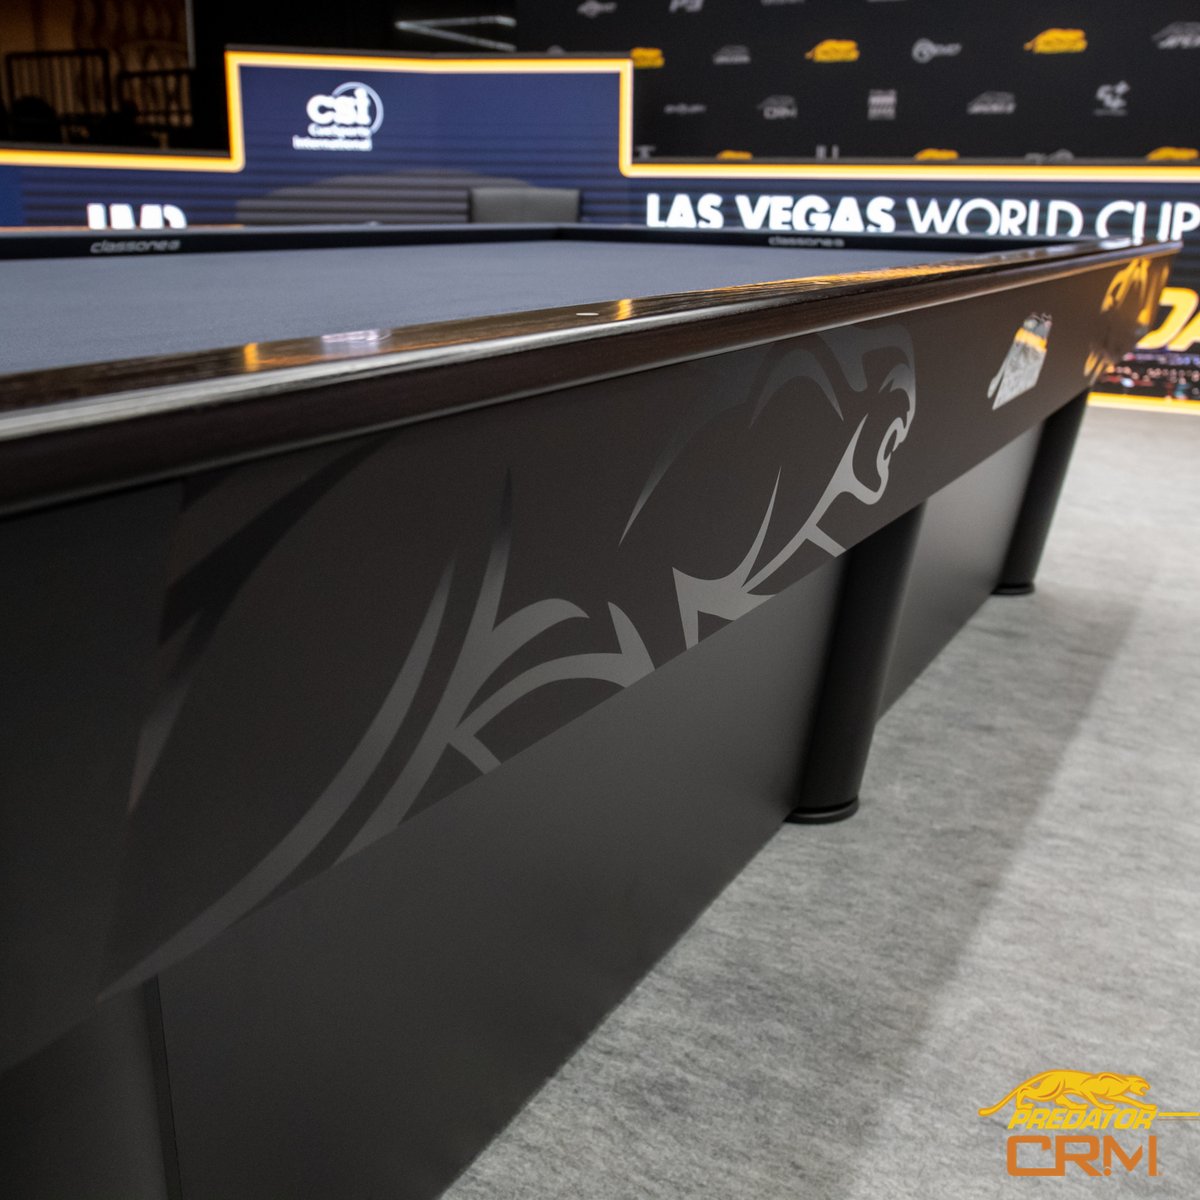 It's all in the details 😏
We're still in awe at how spectacular the #PredatorApex looked at the Predator 3-Cushion World Cup in Las Vegas.
#LasVegasEvents #3Cushion #3CushionWorldCup #CaromTable #CRMTable #CRMPool #PredatorCRM